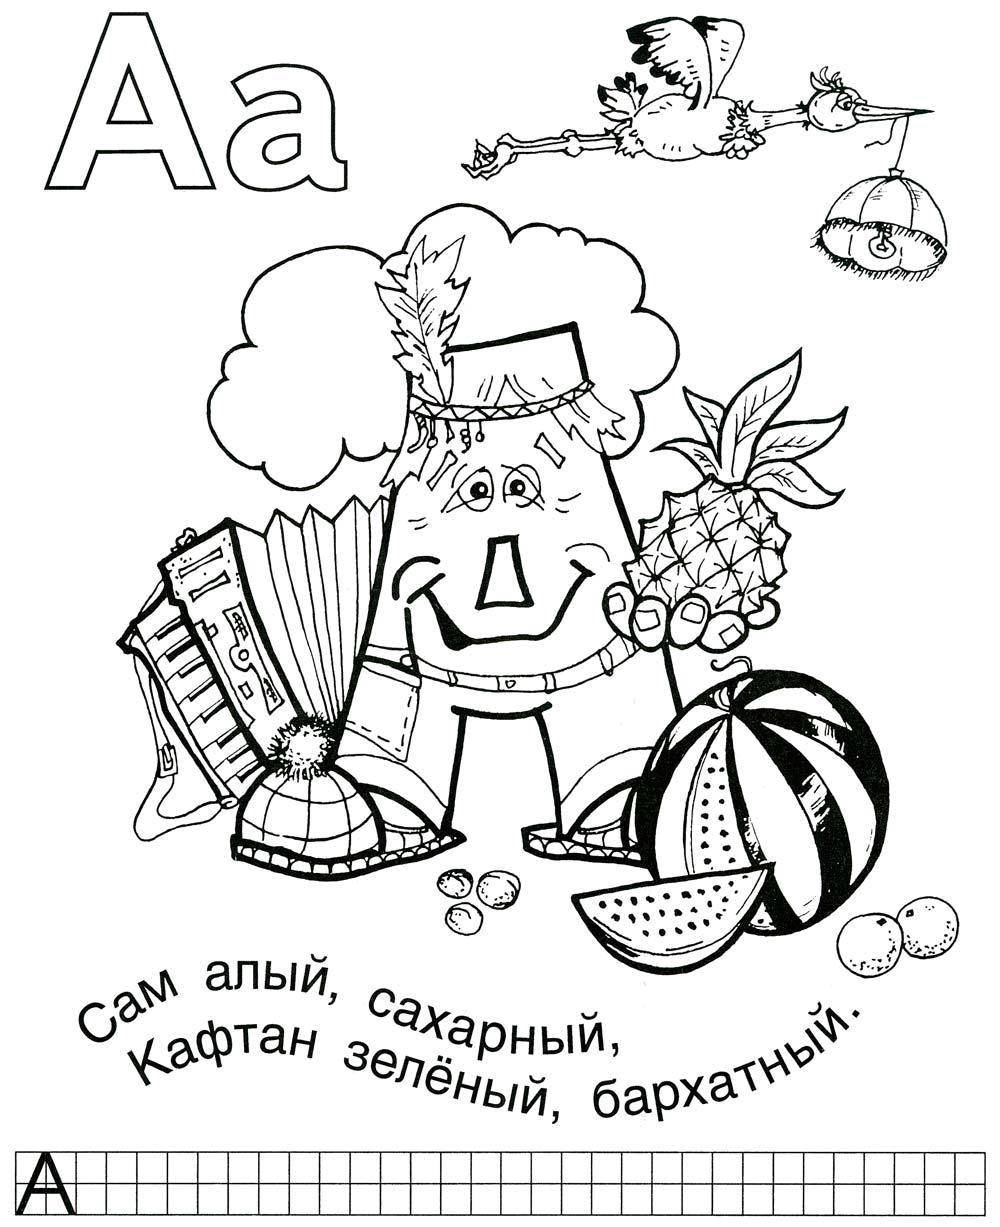 Coloring ABC. Category ABCs . Tags:  The alphabet, letters, words.